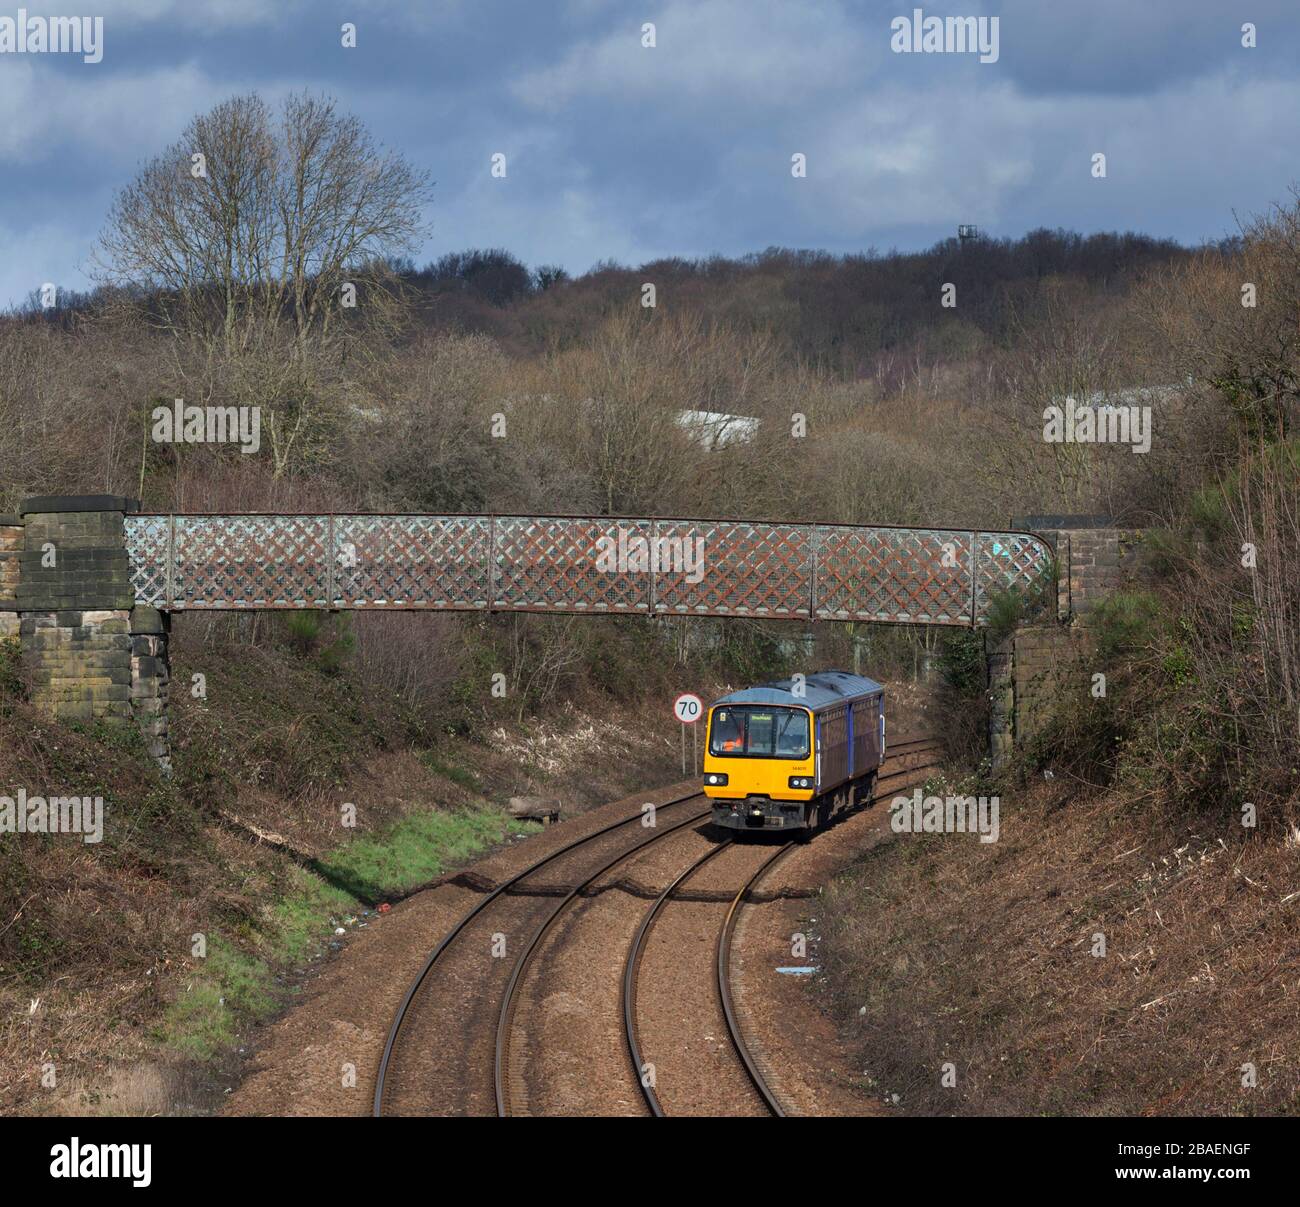 Northern Rail class 144 pacer train 144011 arriving at Chapeltown (south Yorkshire) Stock Photo